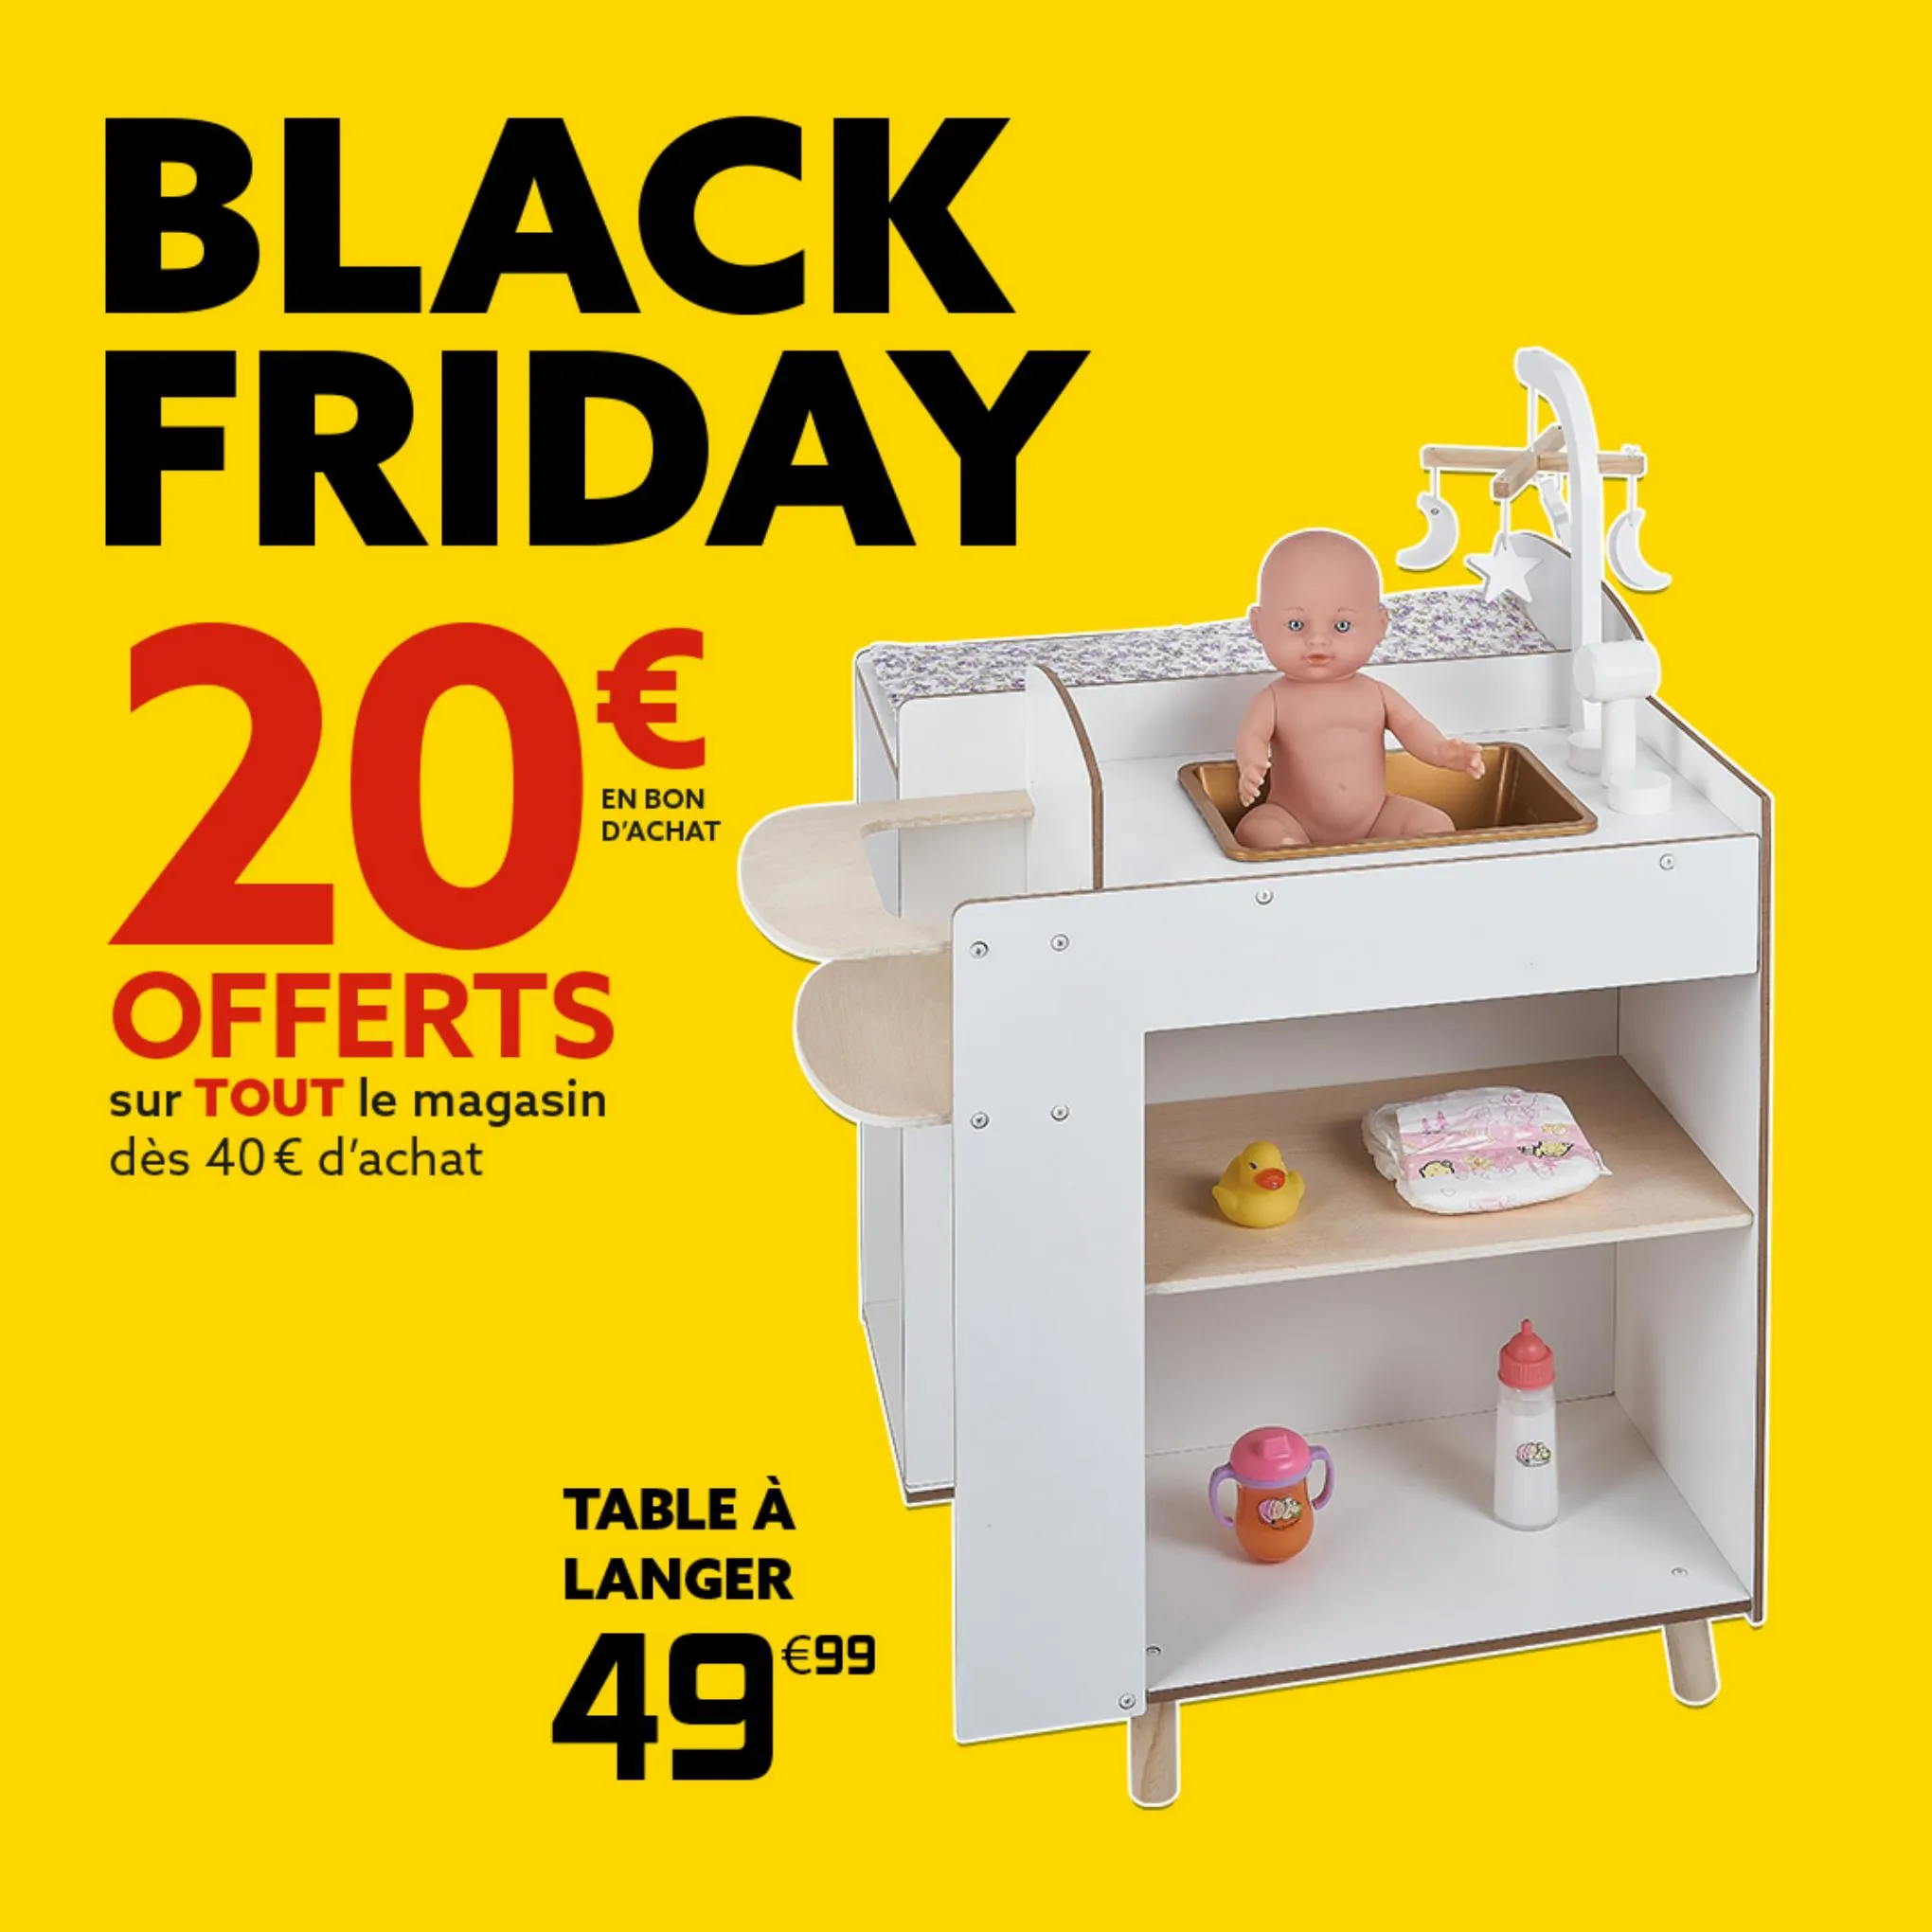 Catalogue Offres Gifi Black Friday, page 00004